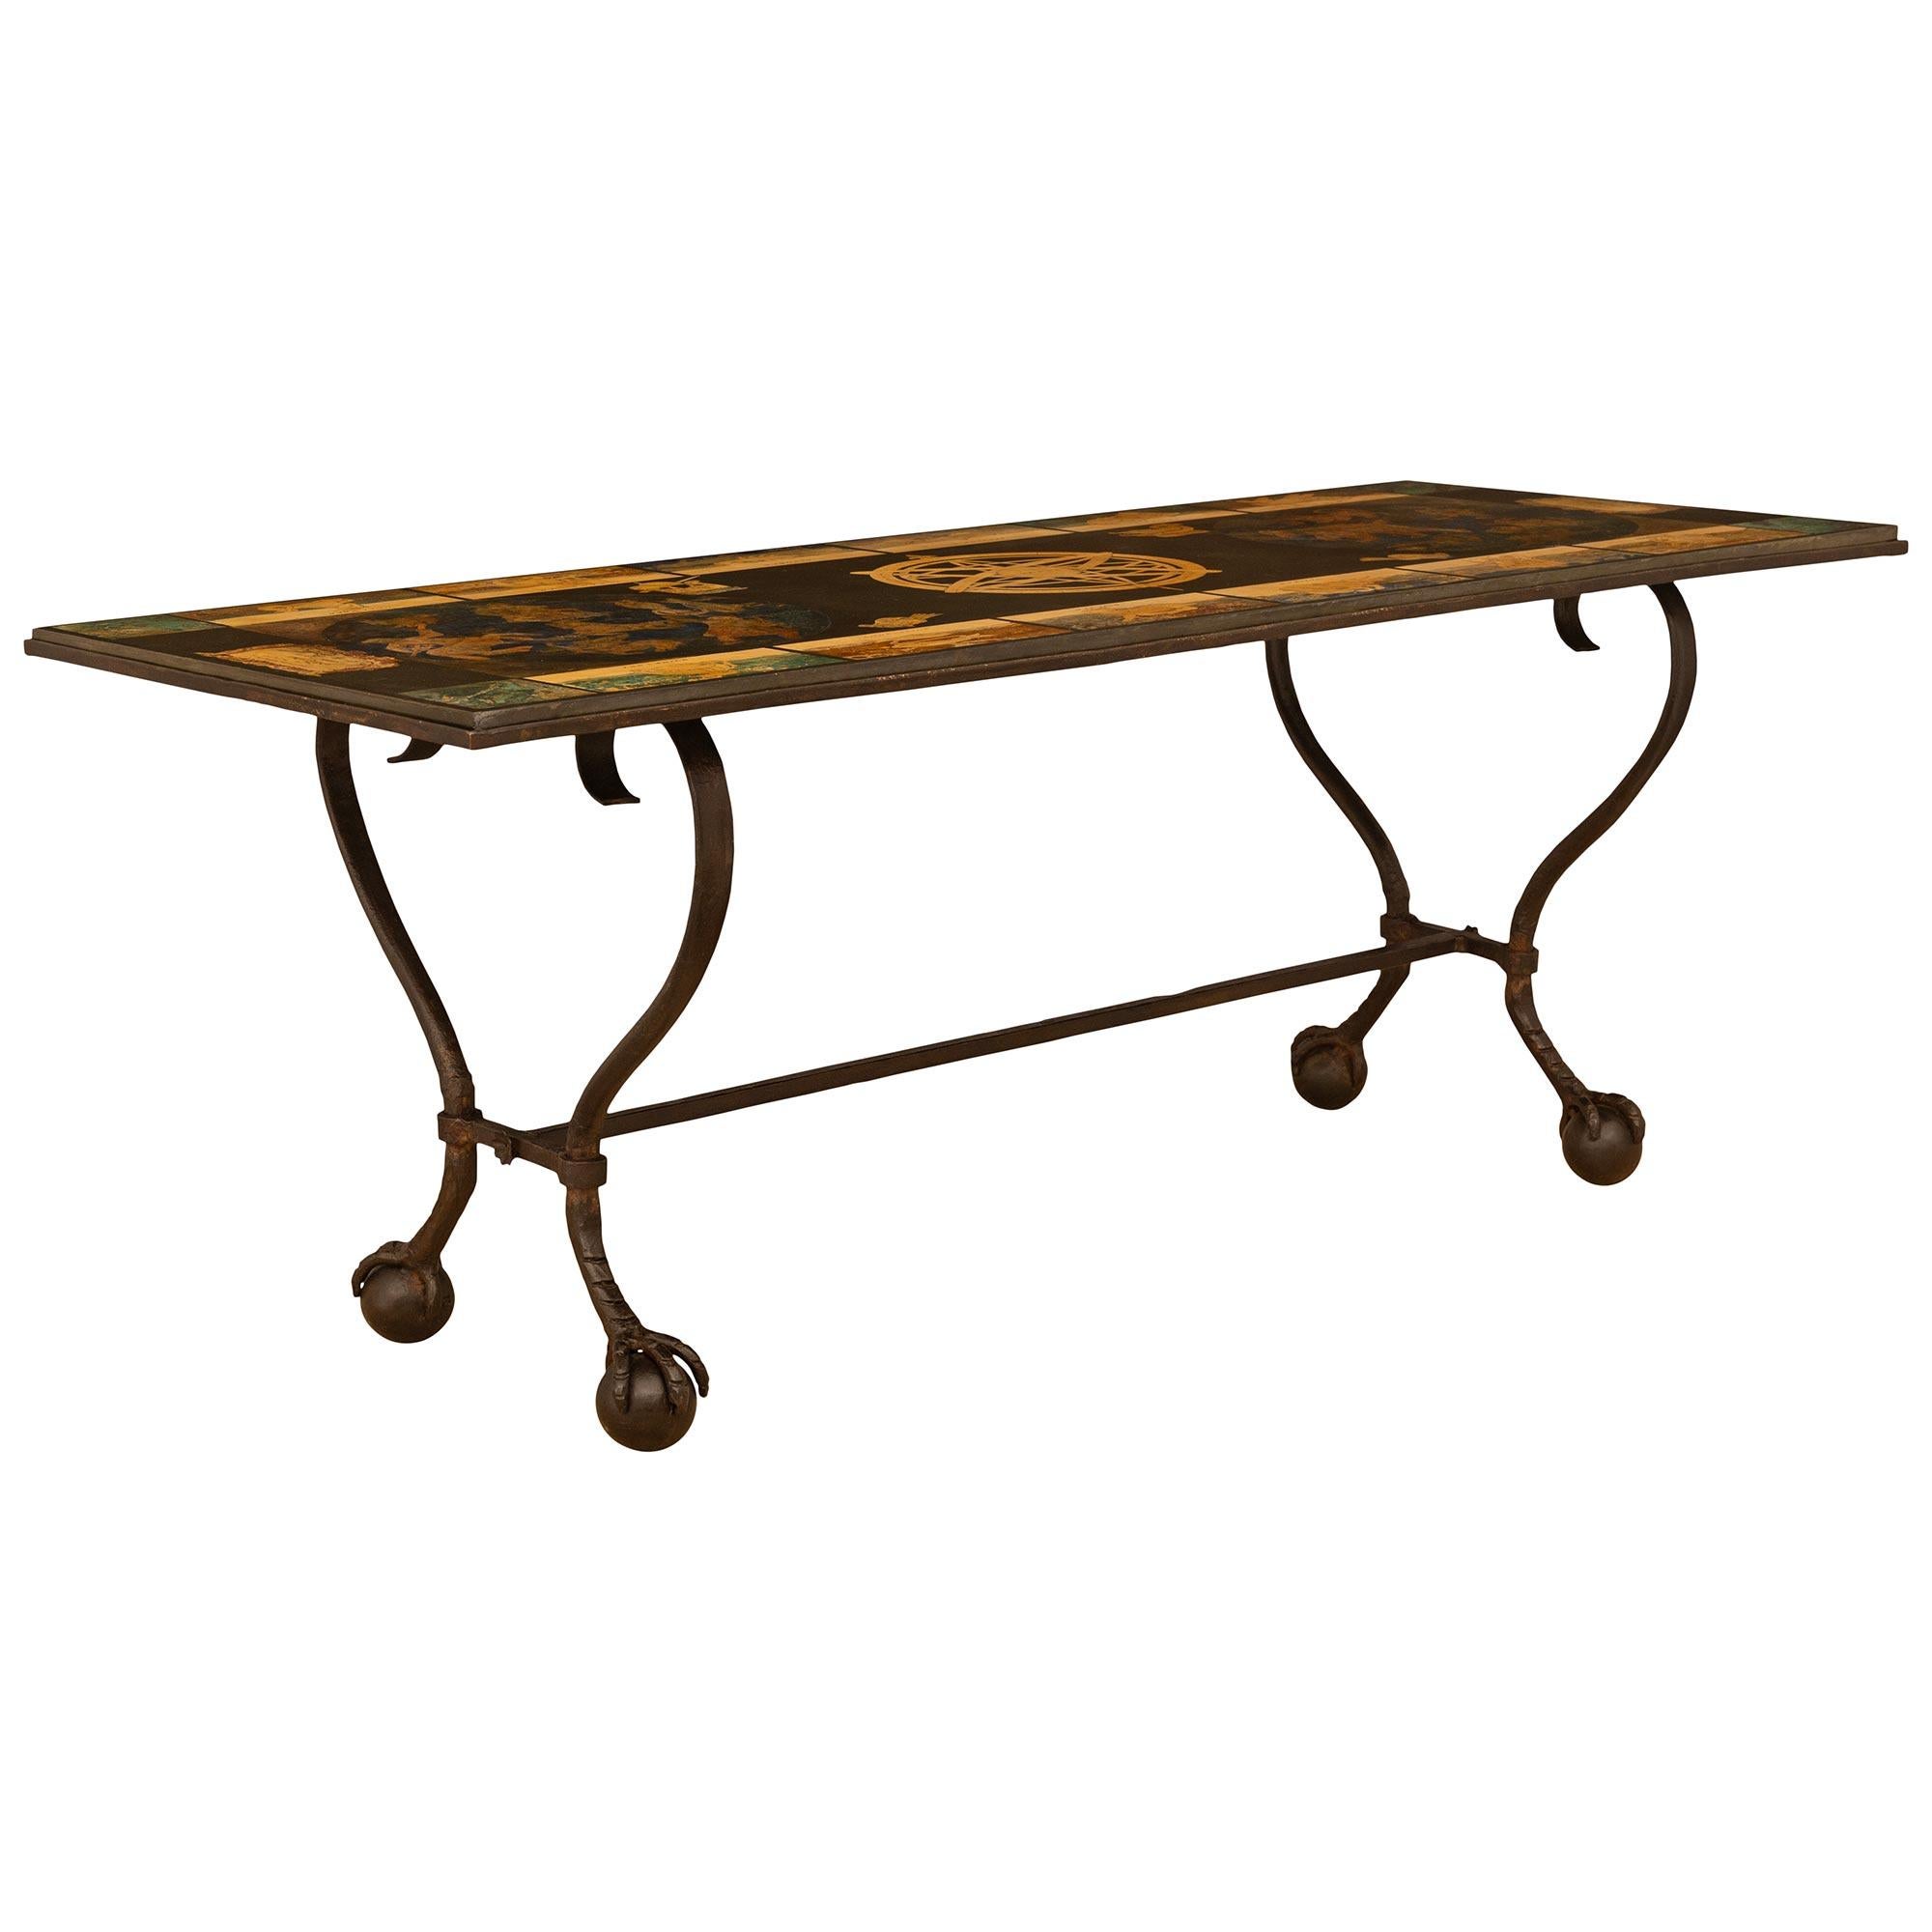 Italian 18th Century Scagliola And Wrought Iron Coffee Table, Circa 1730 In Good Condition For Sale In West Palm Beach, FL